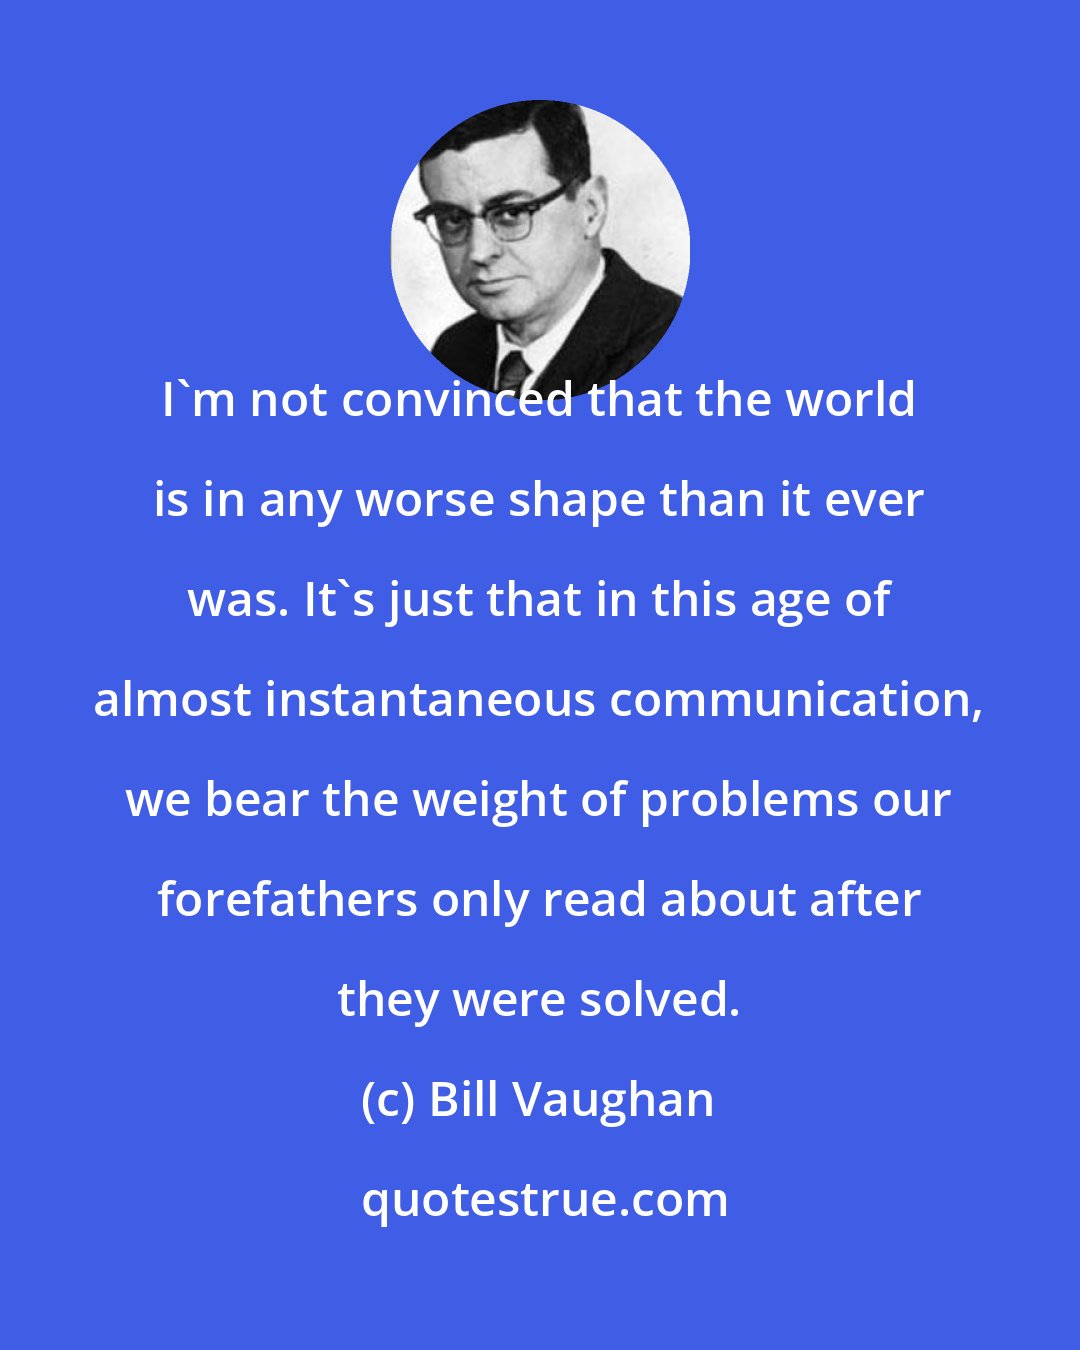 Bill Vaughan: I'm not convinced that the world is in any worse shape than it ever was. It's just that in this age of almost instantaneous communication, we bear the weight of problems our forefathers only read about after they were solved.